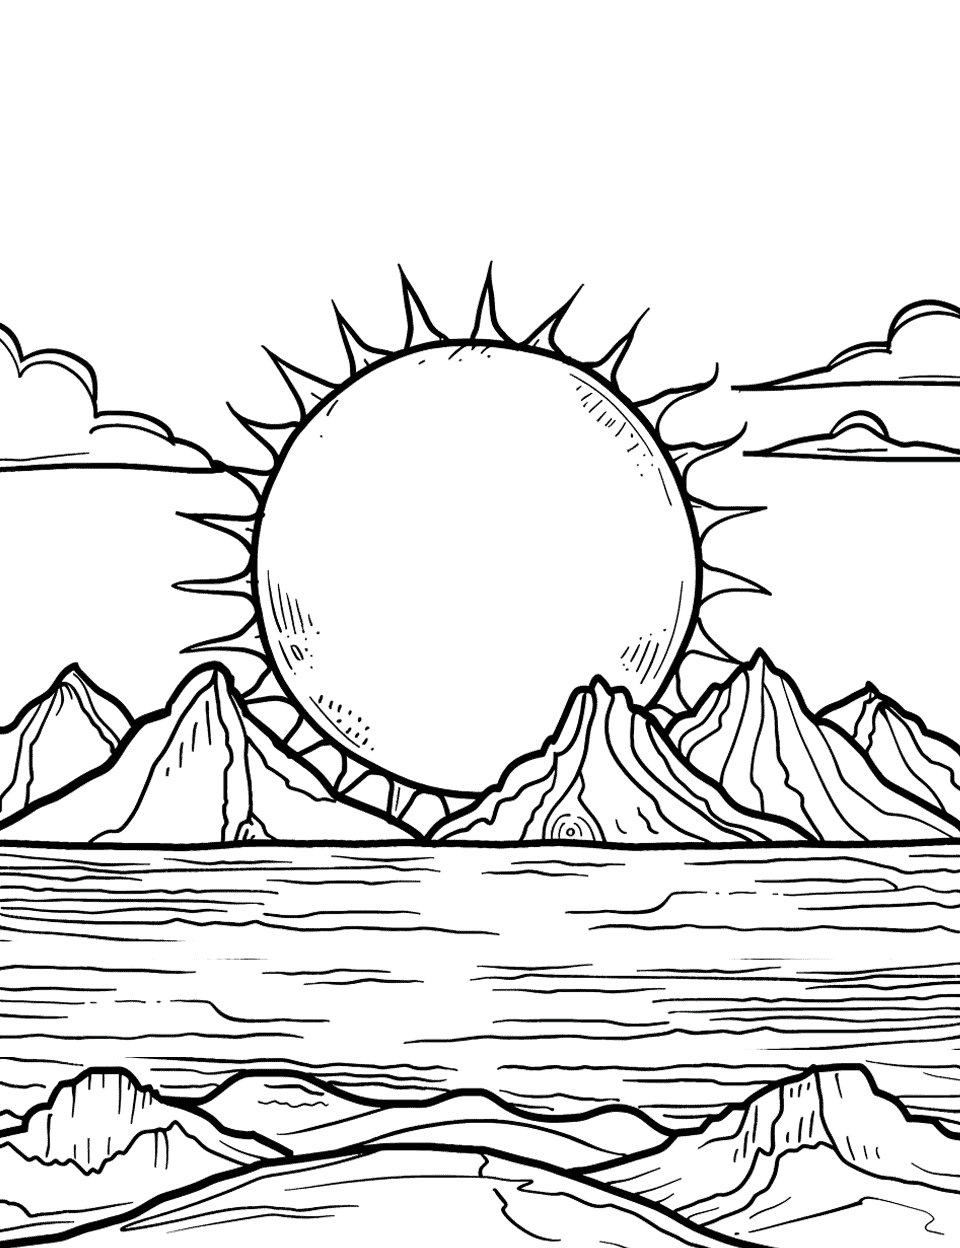 Sun Peeking Behind Mountains Coloring Page - The sun peeking behind towering mountains at sunrise.